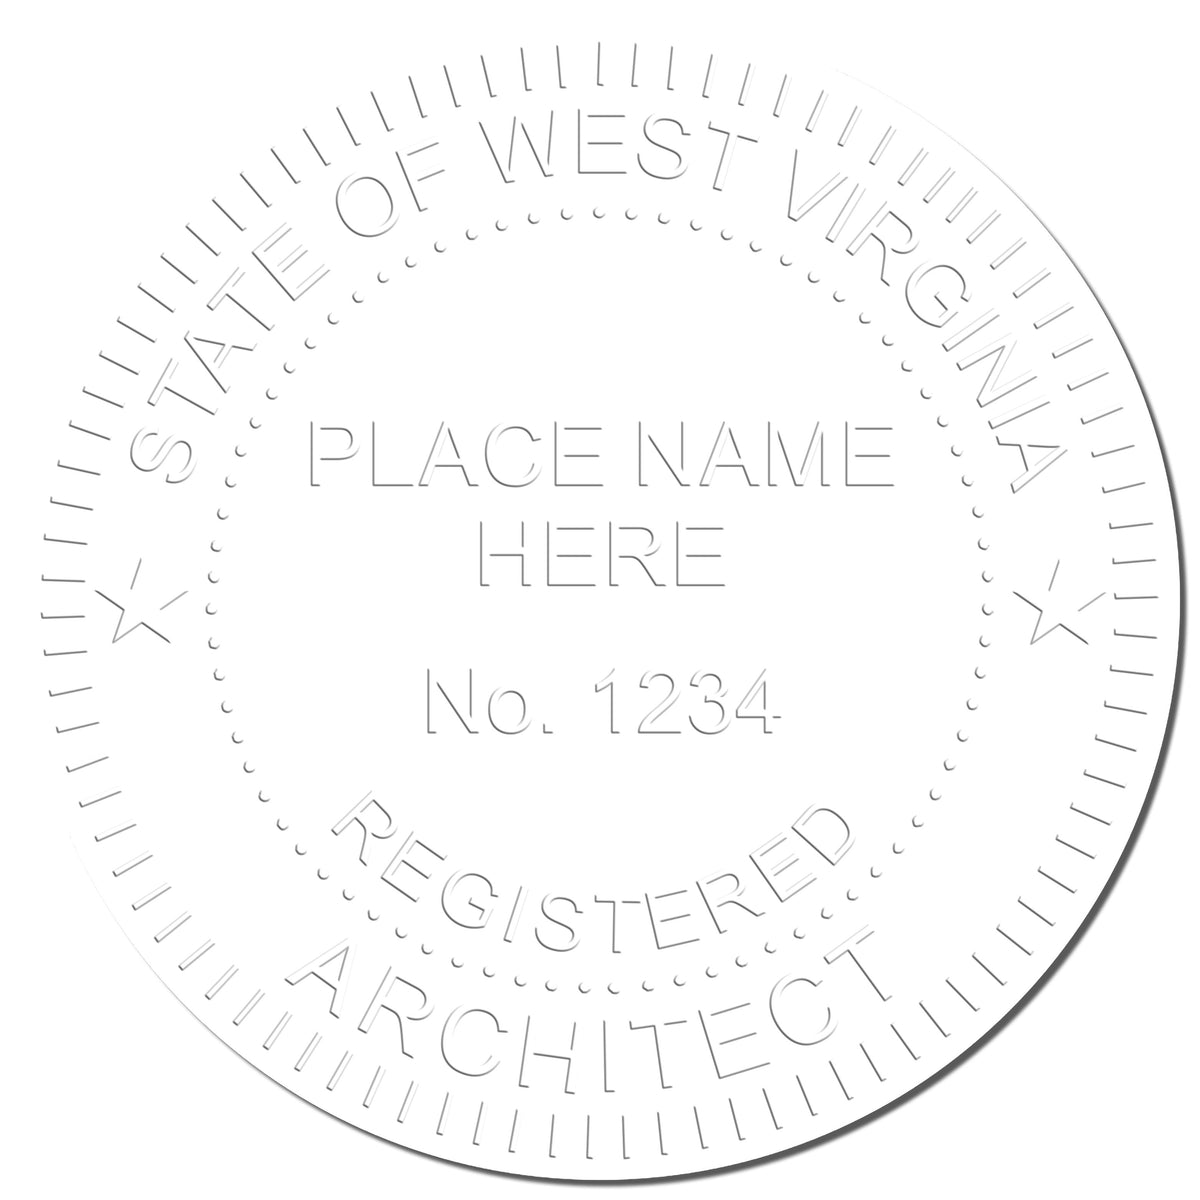 This paper is stamped with a sample imprint of the Hybrid West Virginia Architect Seal, signifying its quality and reliability.